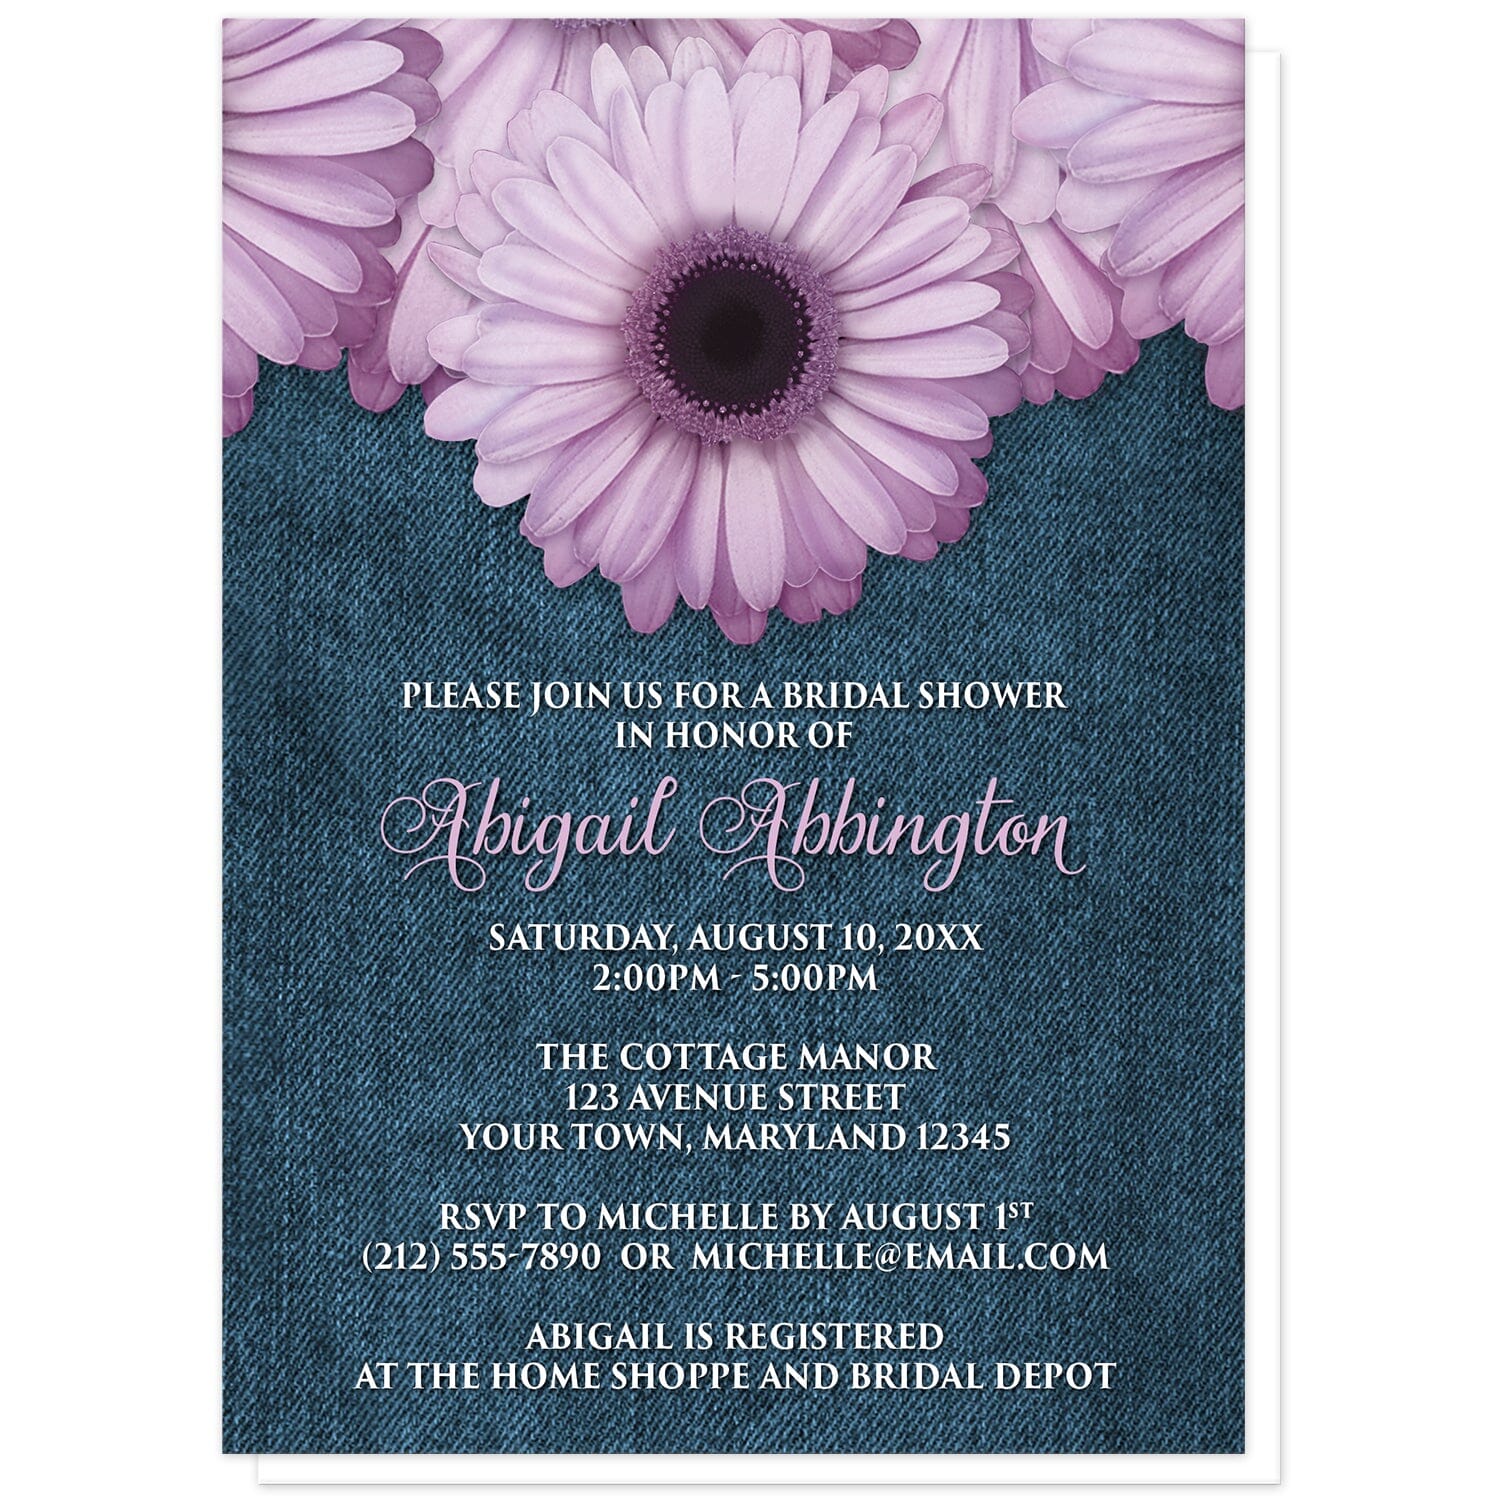 Rustic Purple Daisy Denim Bridal Shower Invitations at Artistically Invited. Rustic purple daisy denim bridal shower invitations designed with large and lovely purple daisy flowers along the top over a country blue denim illustration. Your personalized bridal shower celebration details are custom printed in a whimsical purple script font for the name and the remaining details are represented with an all-capital letters white font on the blue denim background.